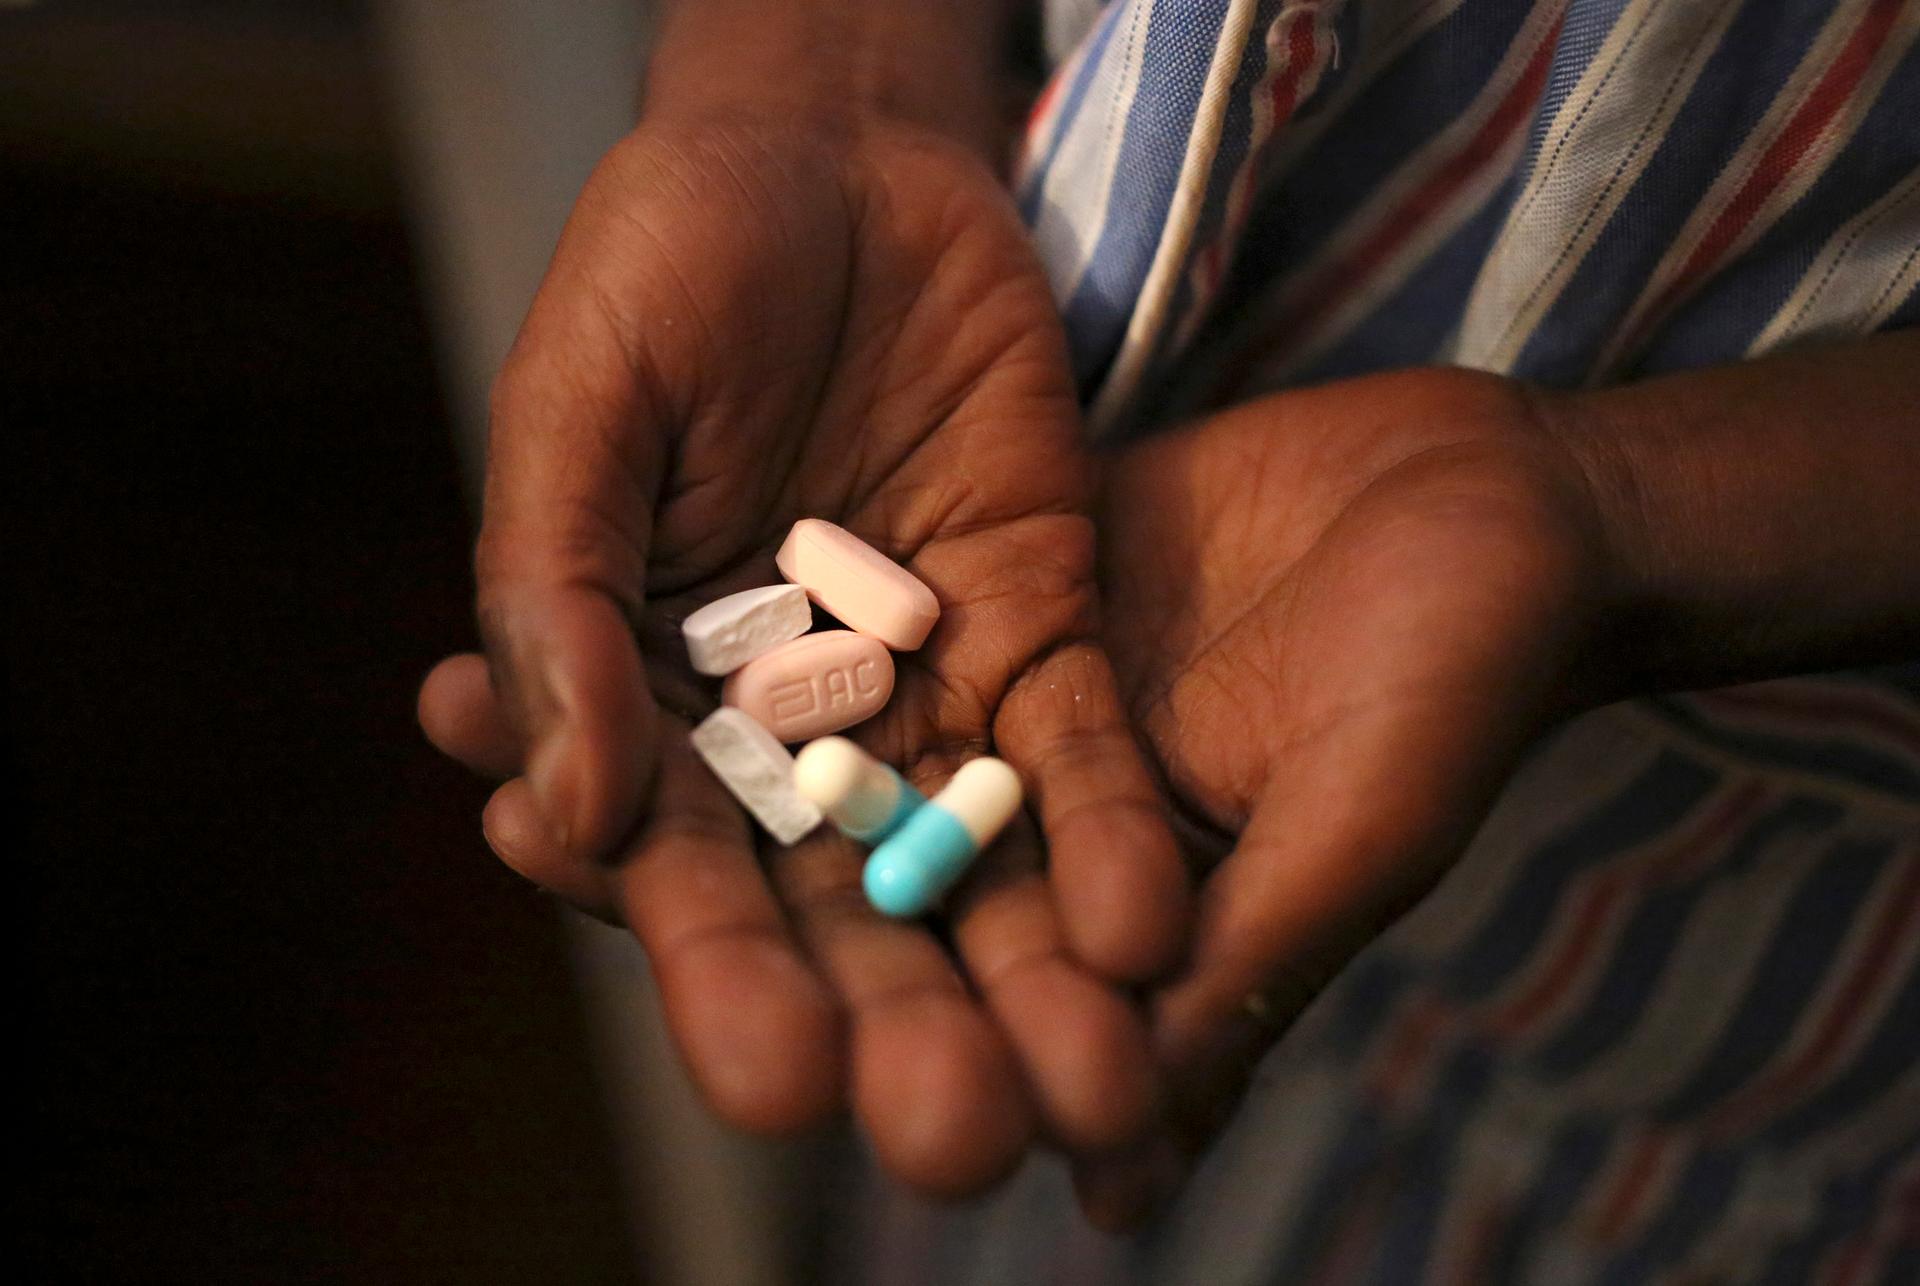 Nine-year-old Tumelo shows off antiretroviral pills before taking his medication at Nkosi's Haven, south of Johannesburg. Such anti-AIDS drugs are used as part of the cheap, illegal cocktail known as "nyaope."